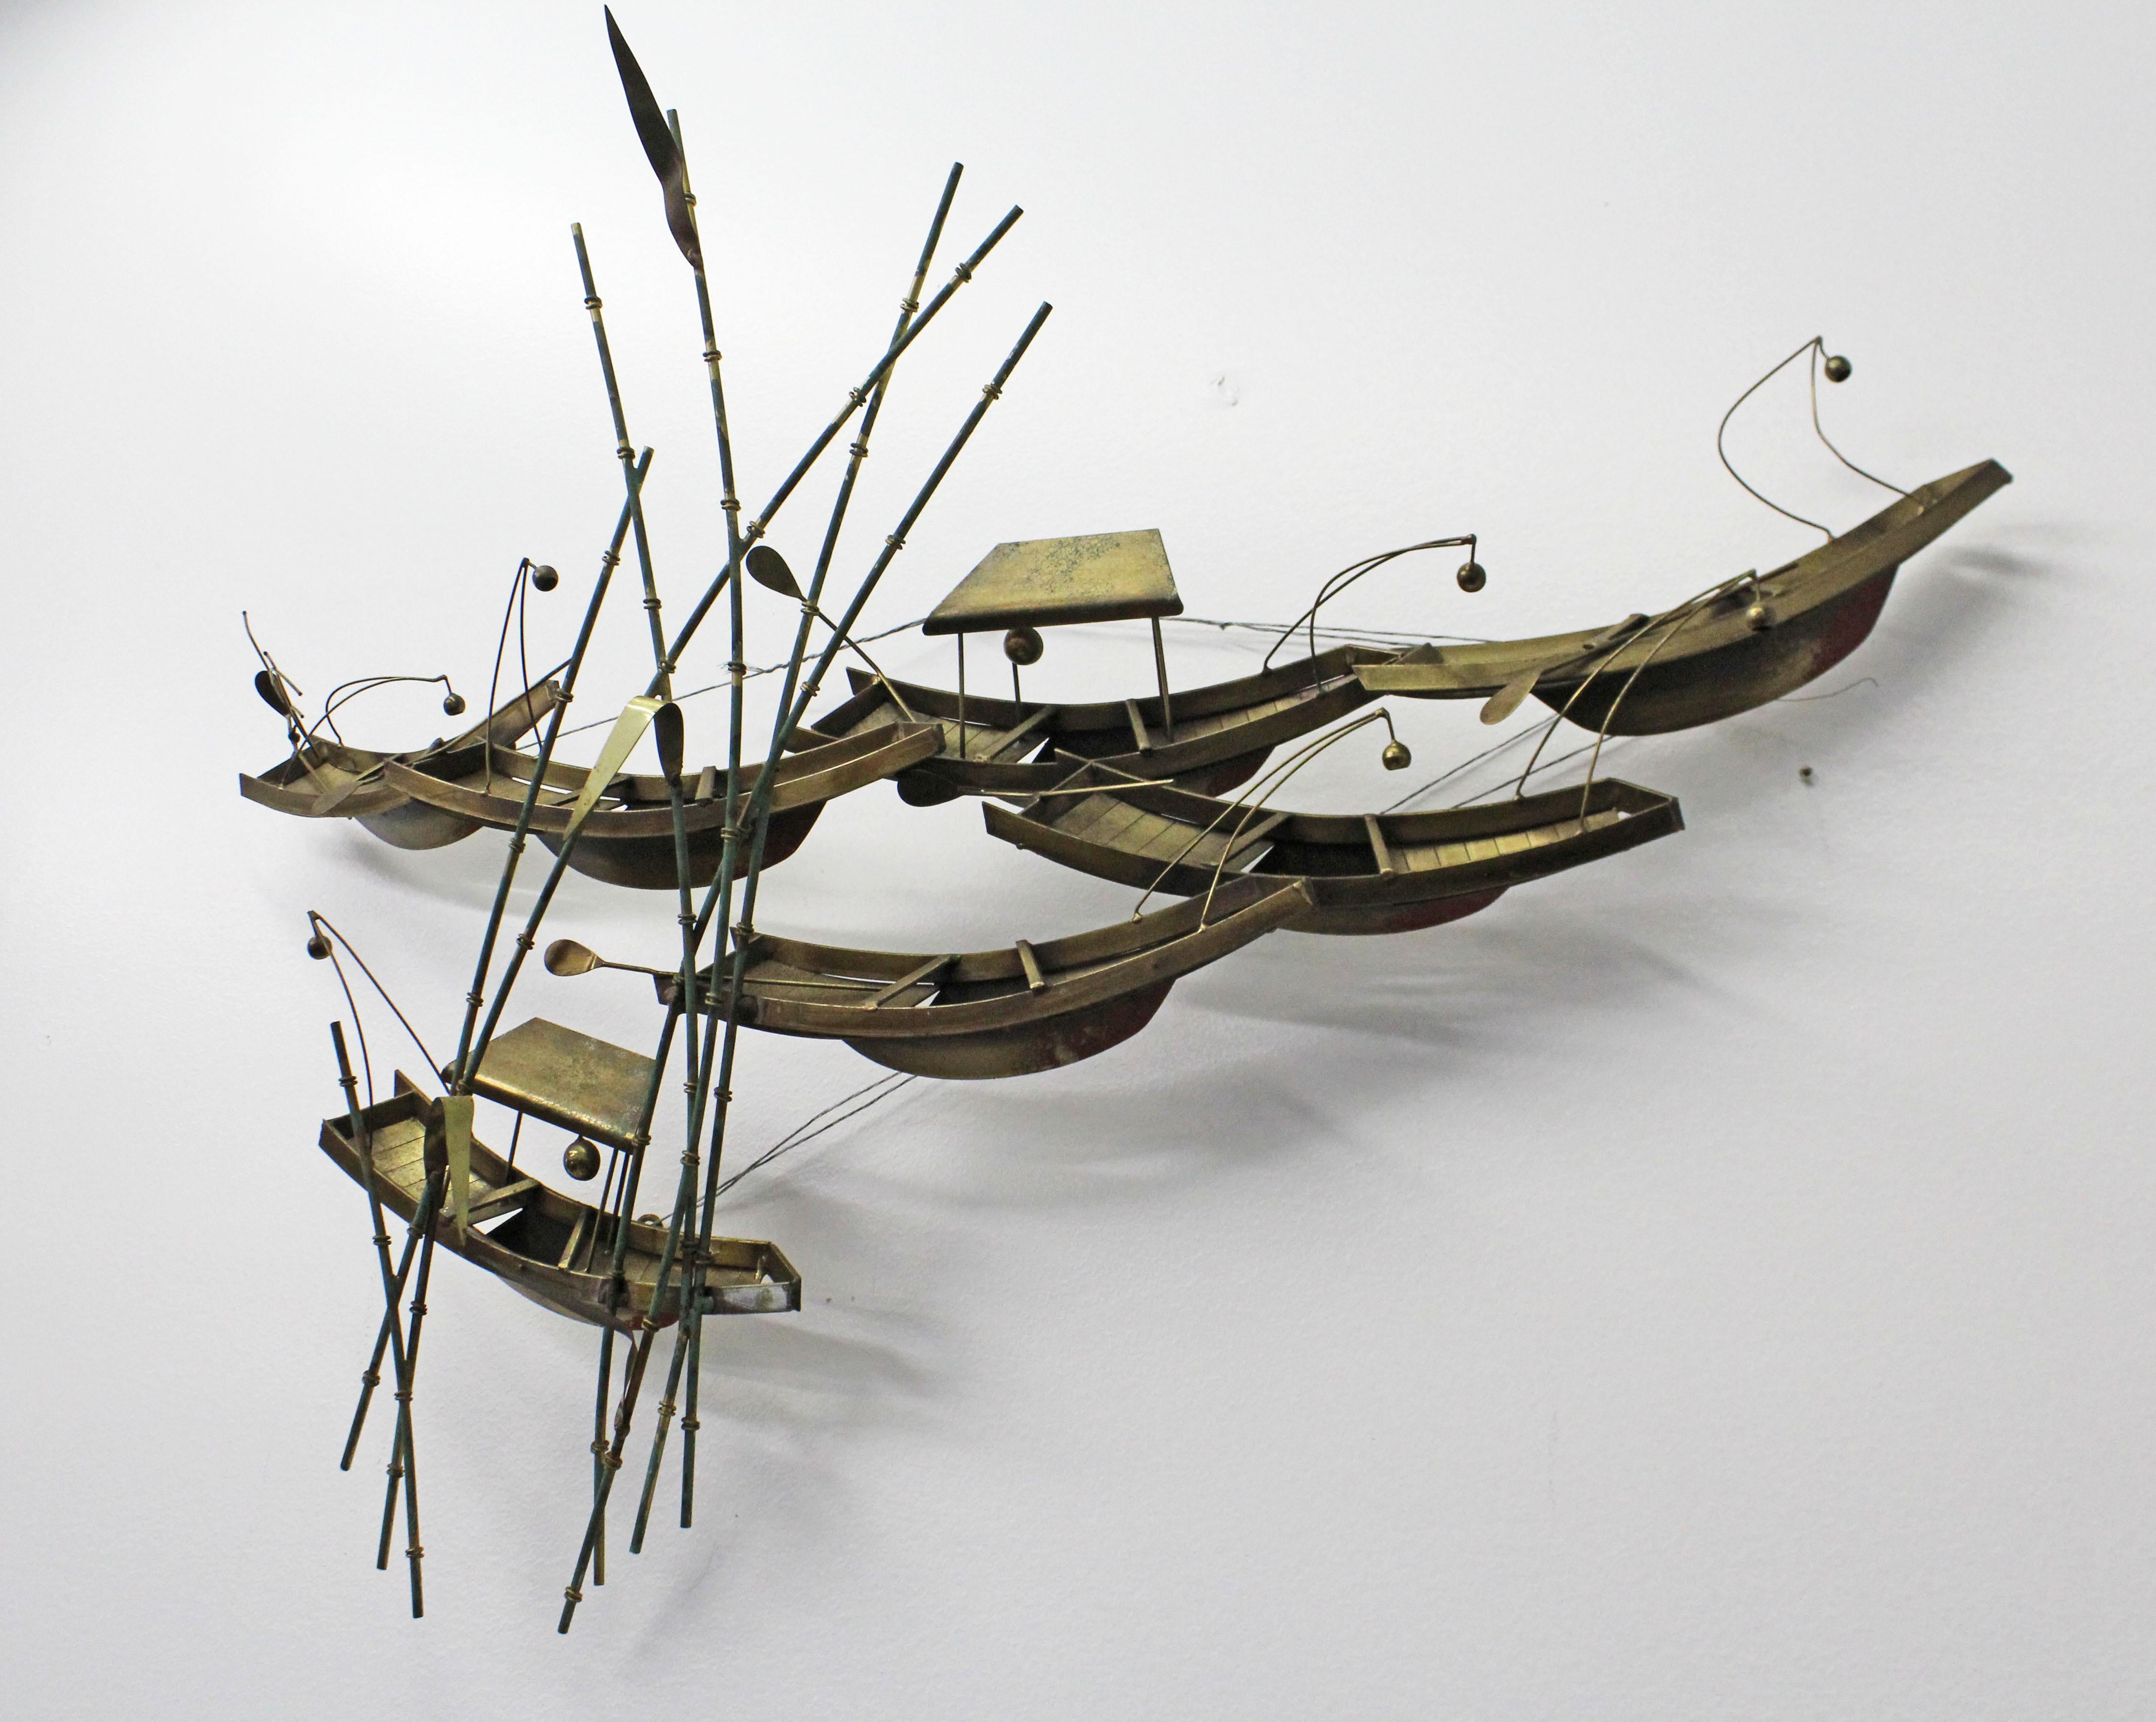 Offered is a vintage original signed Curtis Jerè sculpture entitled 'Boats and Bamboo'. The piece is made of brass, featuring an Asian Style boat and bamboo design. Has metal wire on the back for hanging. It is in good vintage condition with some